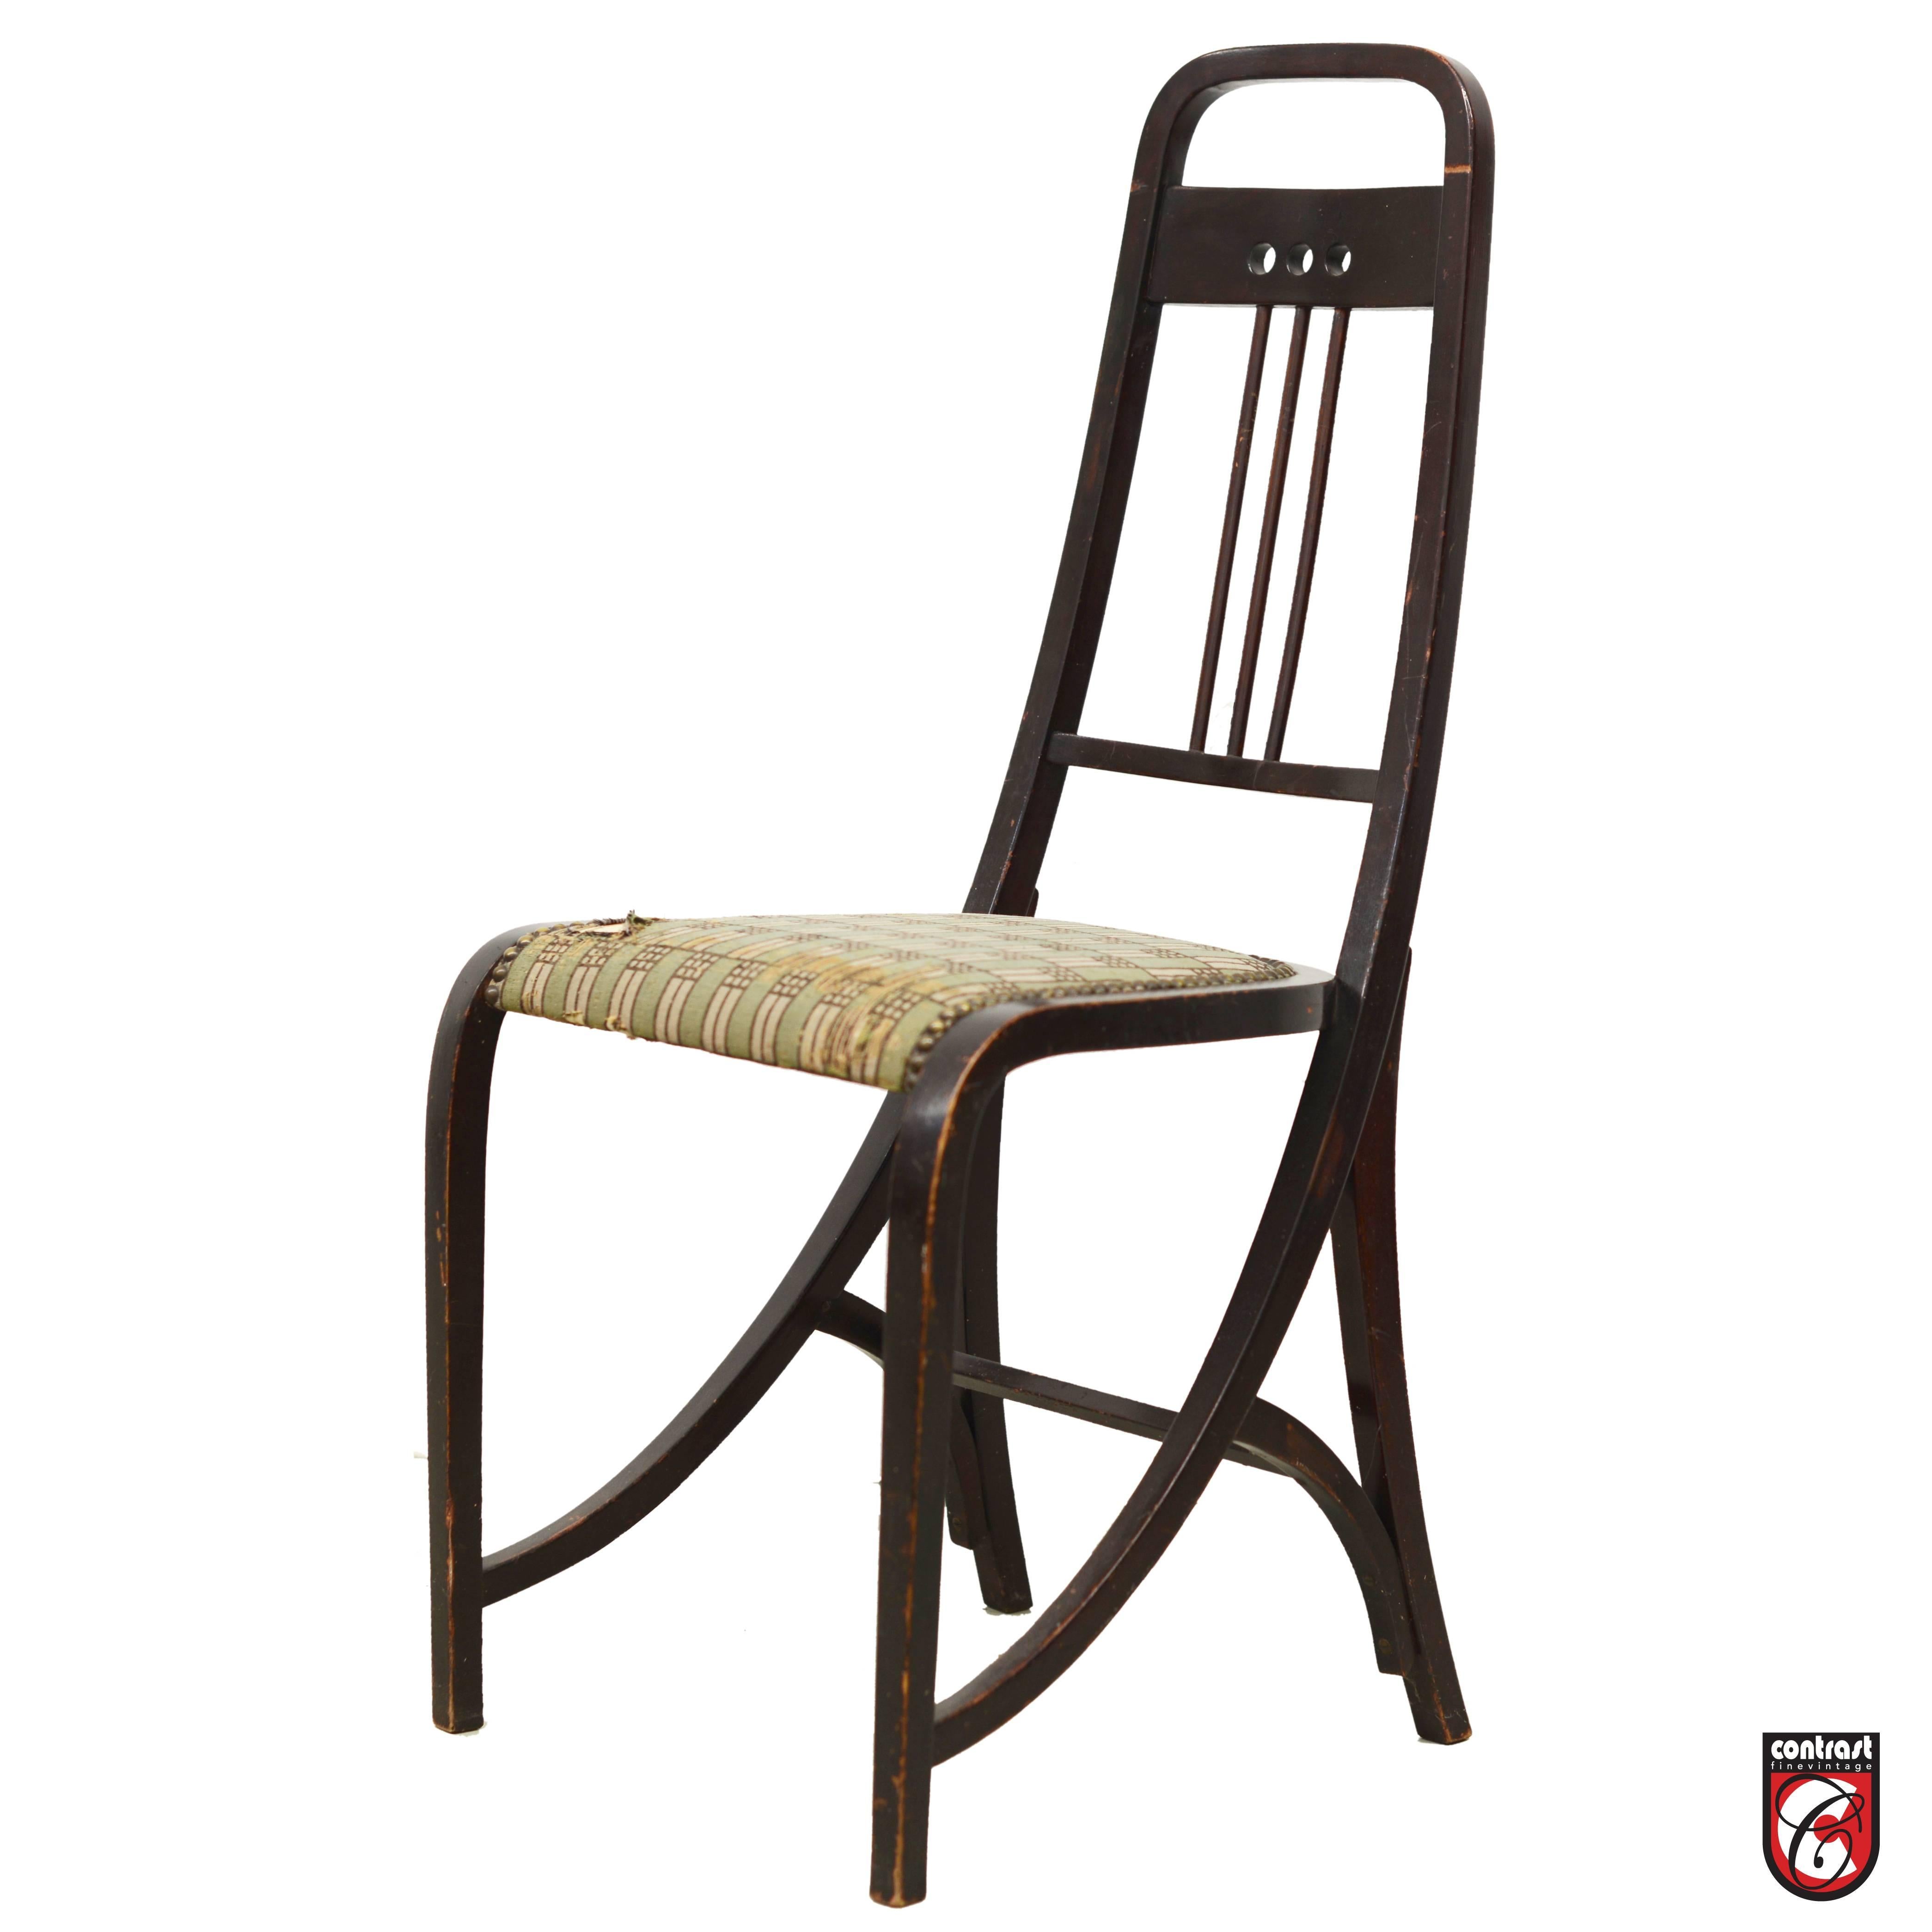 Thonet Chair model nr. 511.
Here shown in a Thonet catalog. The design is a mixture of elements of Art
Nouveau and Vienna architect style.
All original with the original Weiner Werkstatte fabric design.